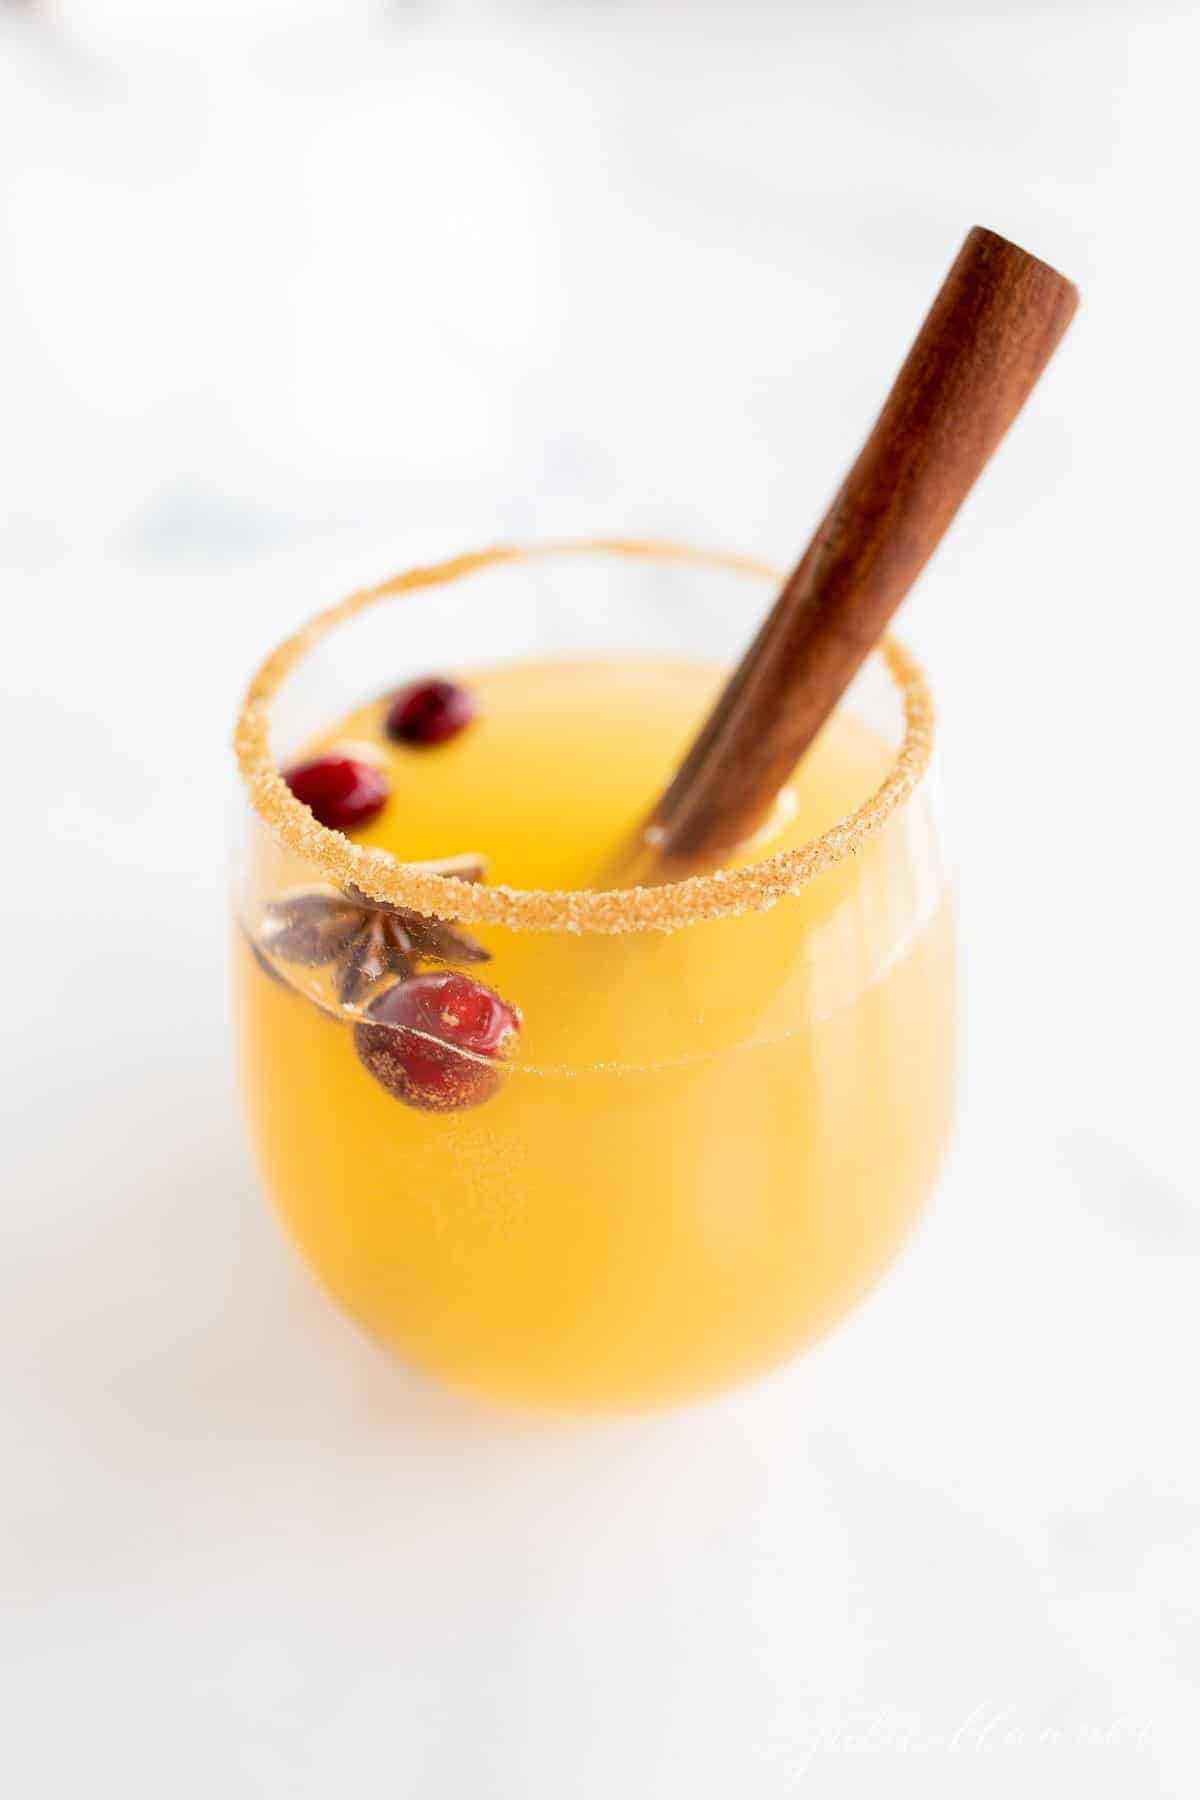 A clear glass full of Christmas sangria with cranberries and a cinnamon stick.